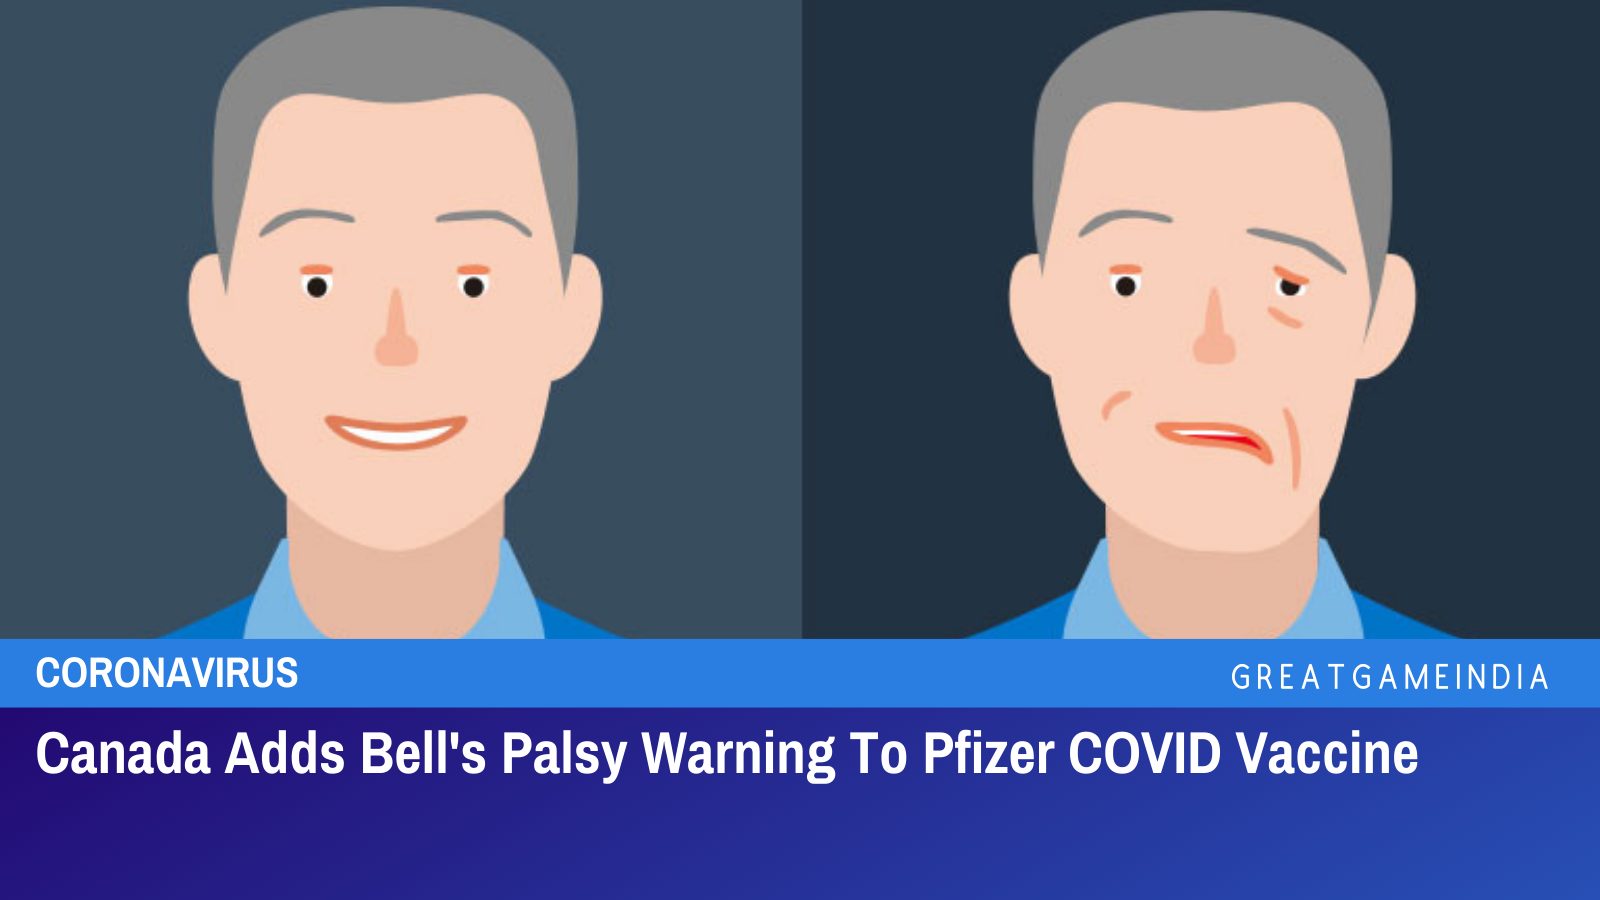 Canada Adds Bell's Palsy Warning To Pfizer COVID Vaccine